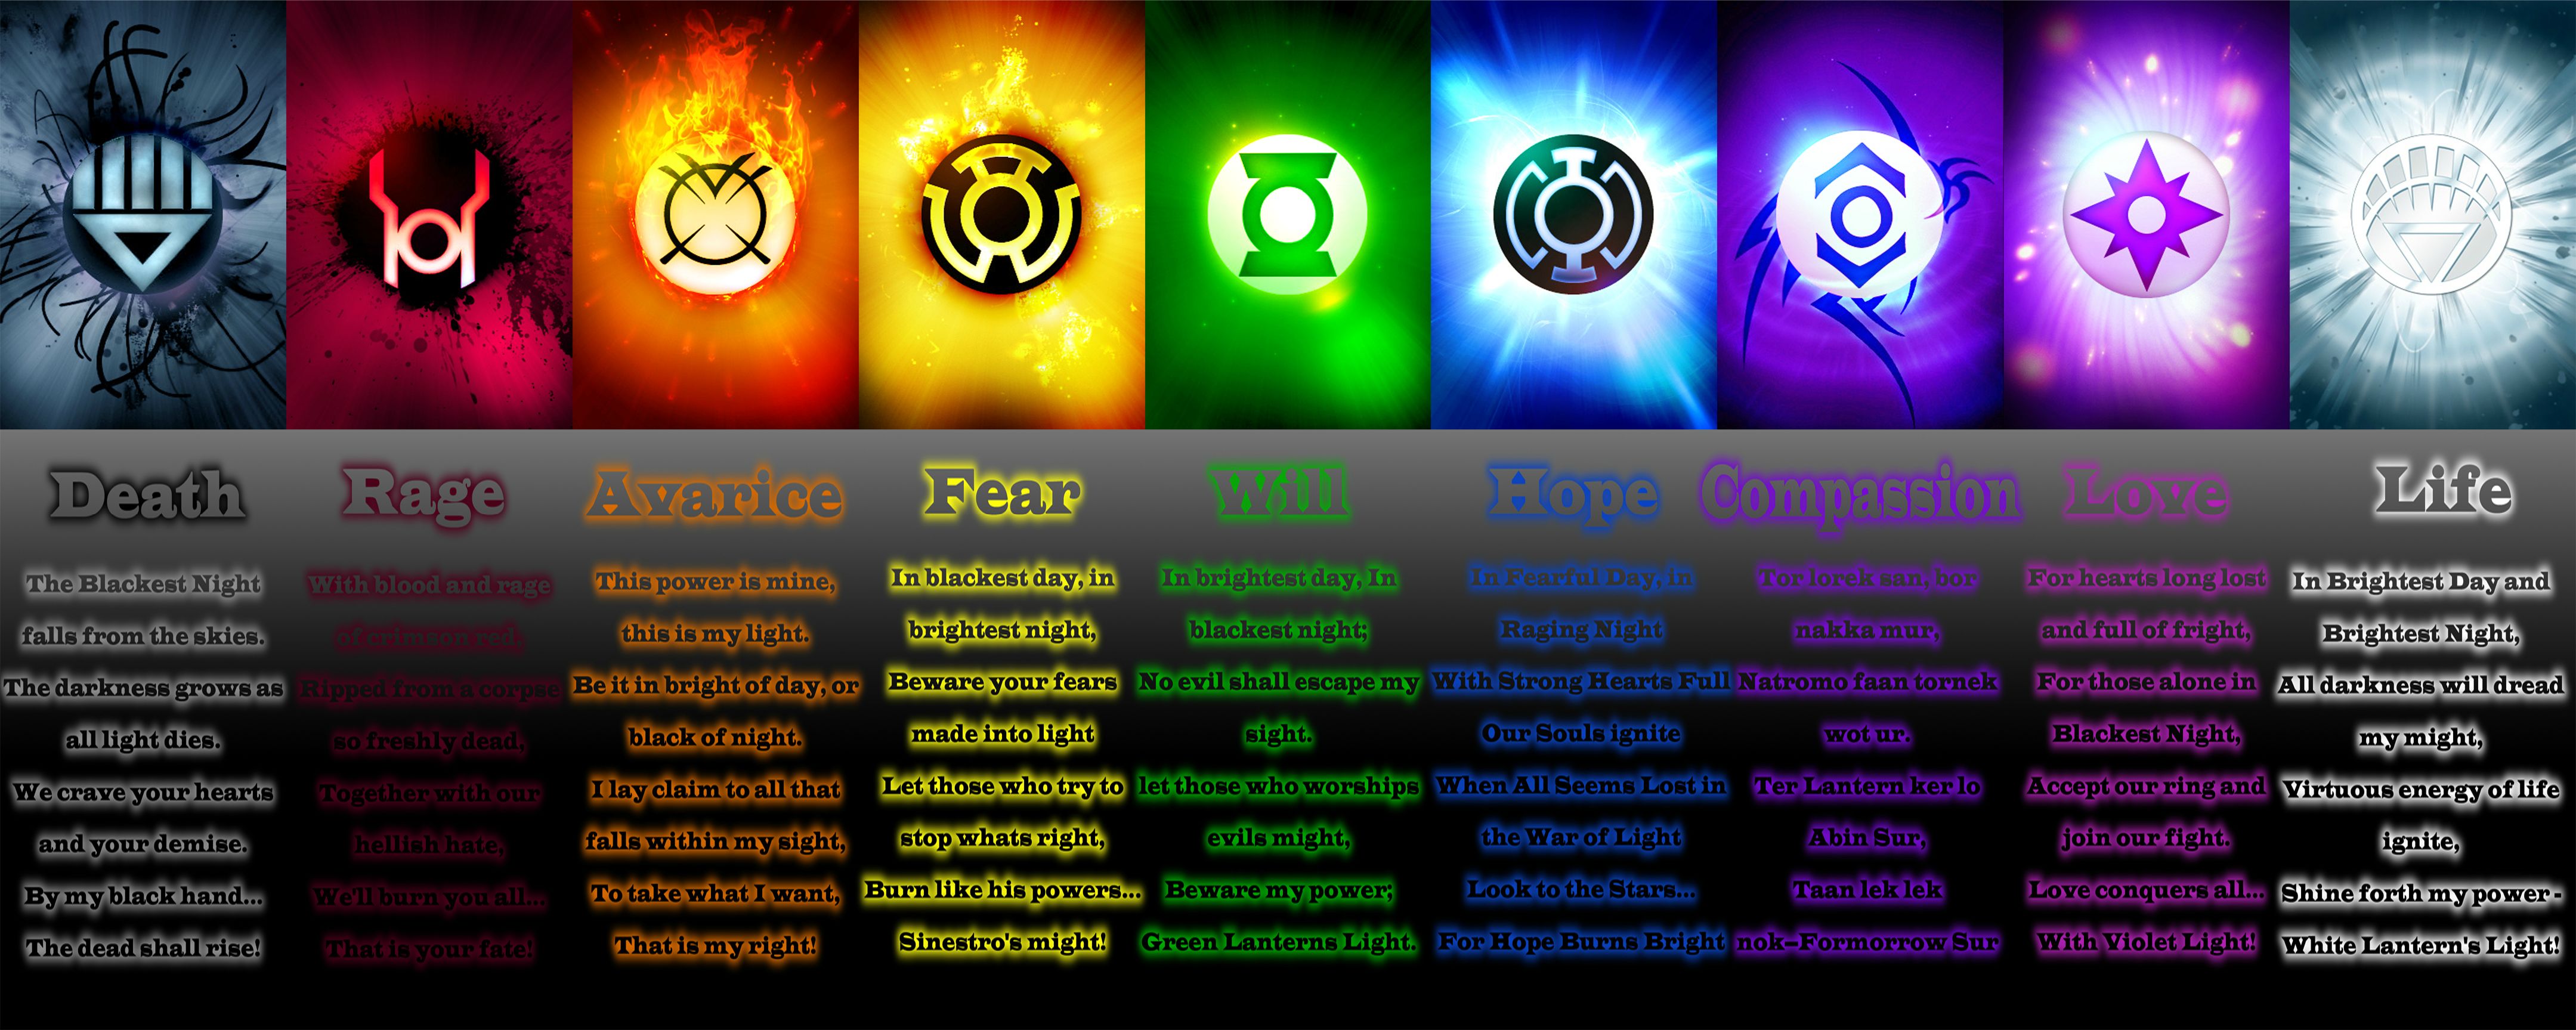 Amazing Lantern Corps Pictures & Backgrounds